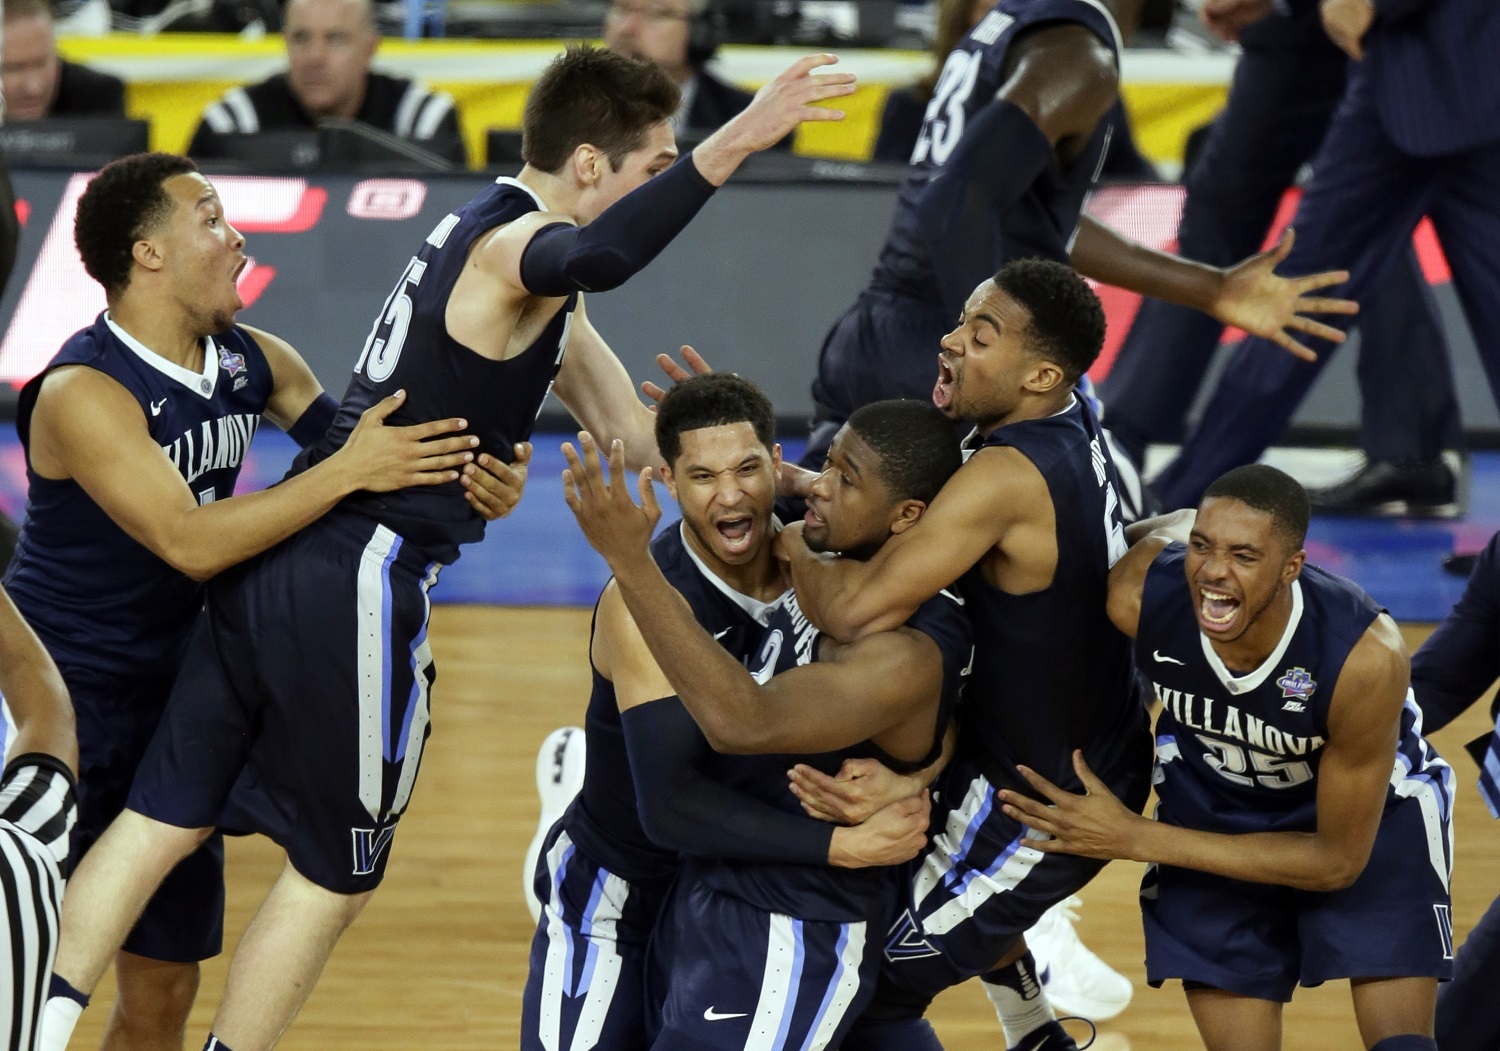 ADVANCE FOR WEEKEND EDITIONS, NOV. 5-6 - FILE - In this April 4, 2016, file photo, Villanova players celebrates after Kris Jenkins, center, made the game-winning basket as they defeated North Carolina 77-74 in the championship game of the the NCAA Final Four college tournament in Houston. The Wildcats reign as champions for the first time in three decades. (AP Photo/Charlie Neibergall, File)